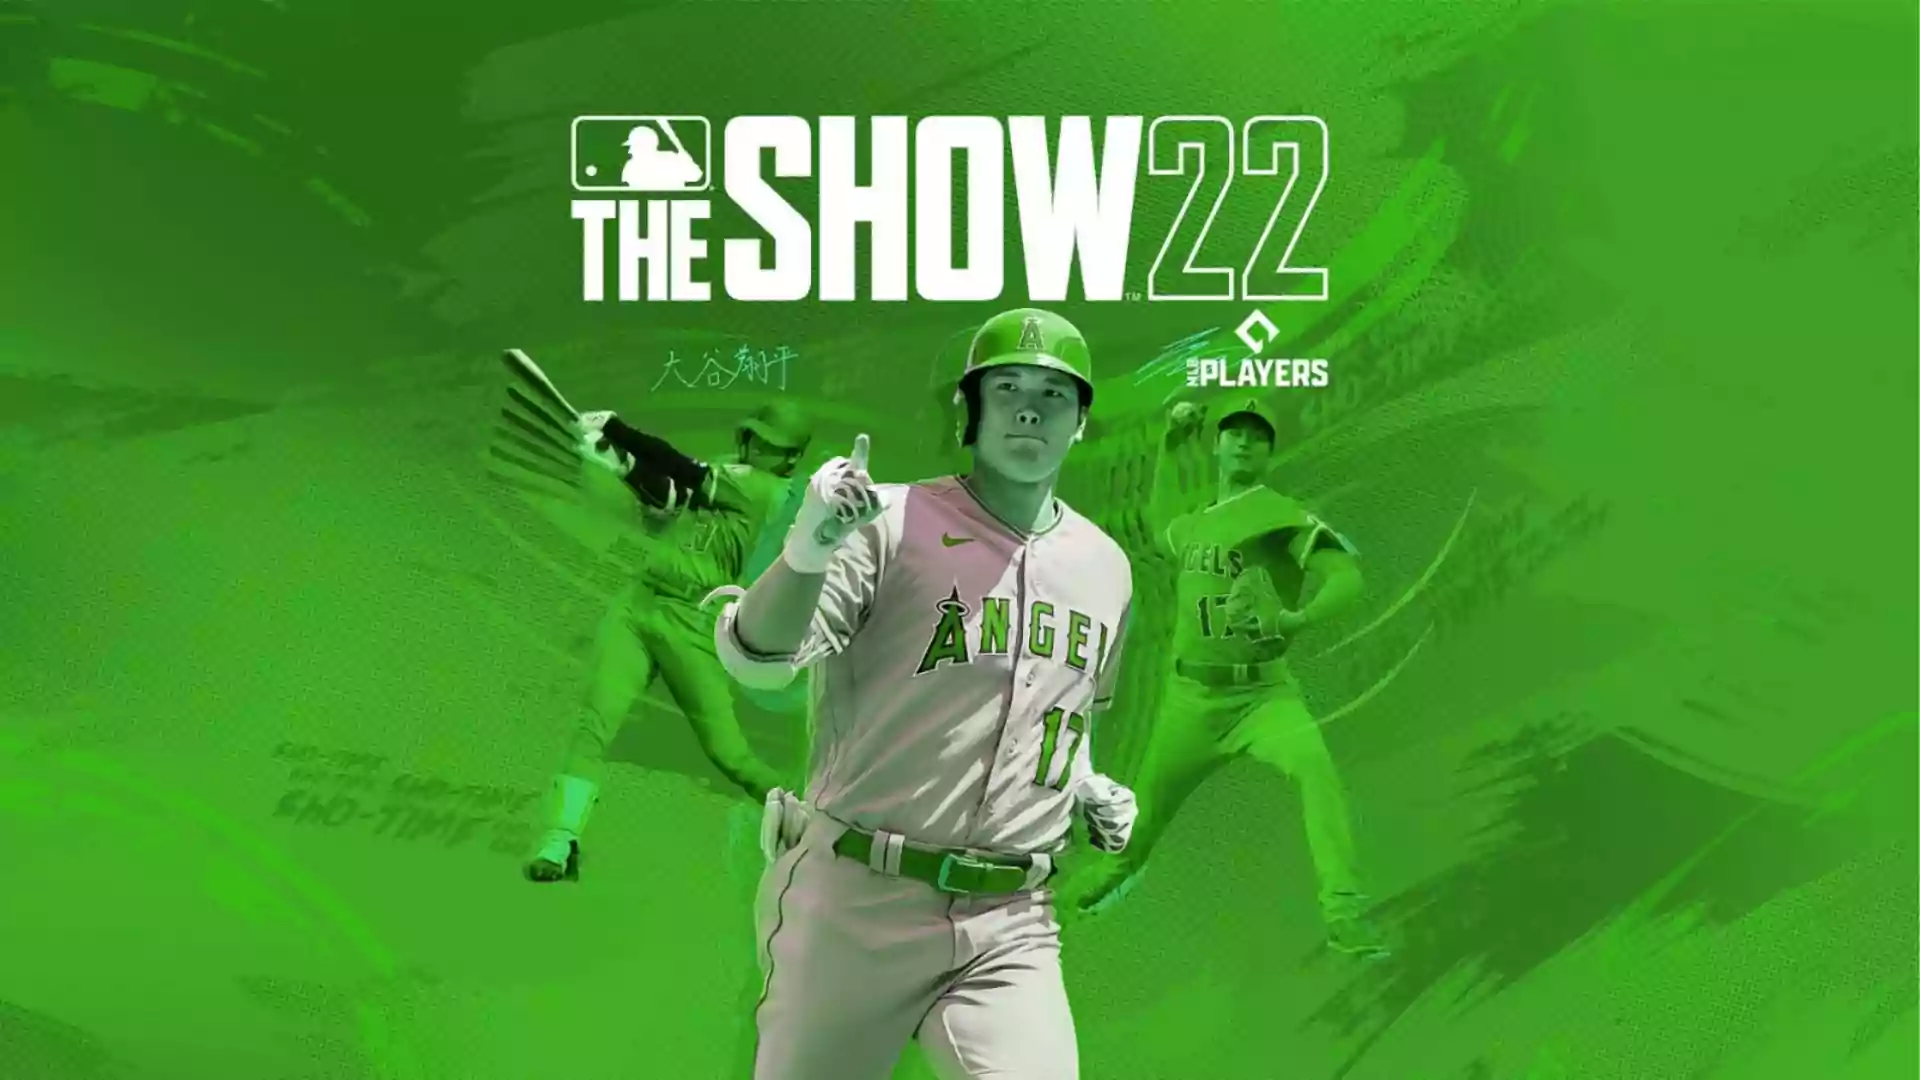 MLB The Show 22 Parents Guide | MLB The Show 22 Age Rating